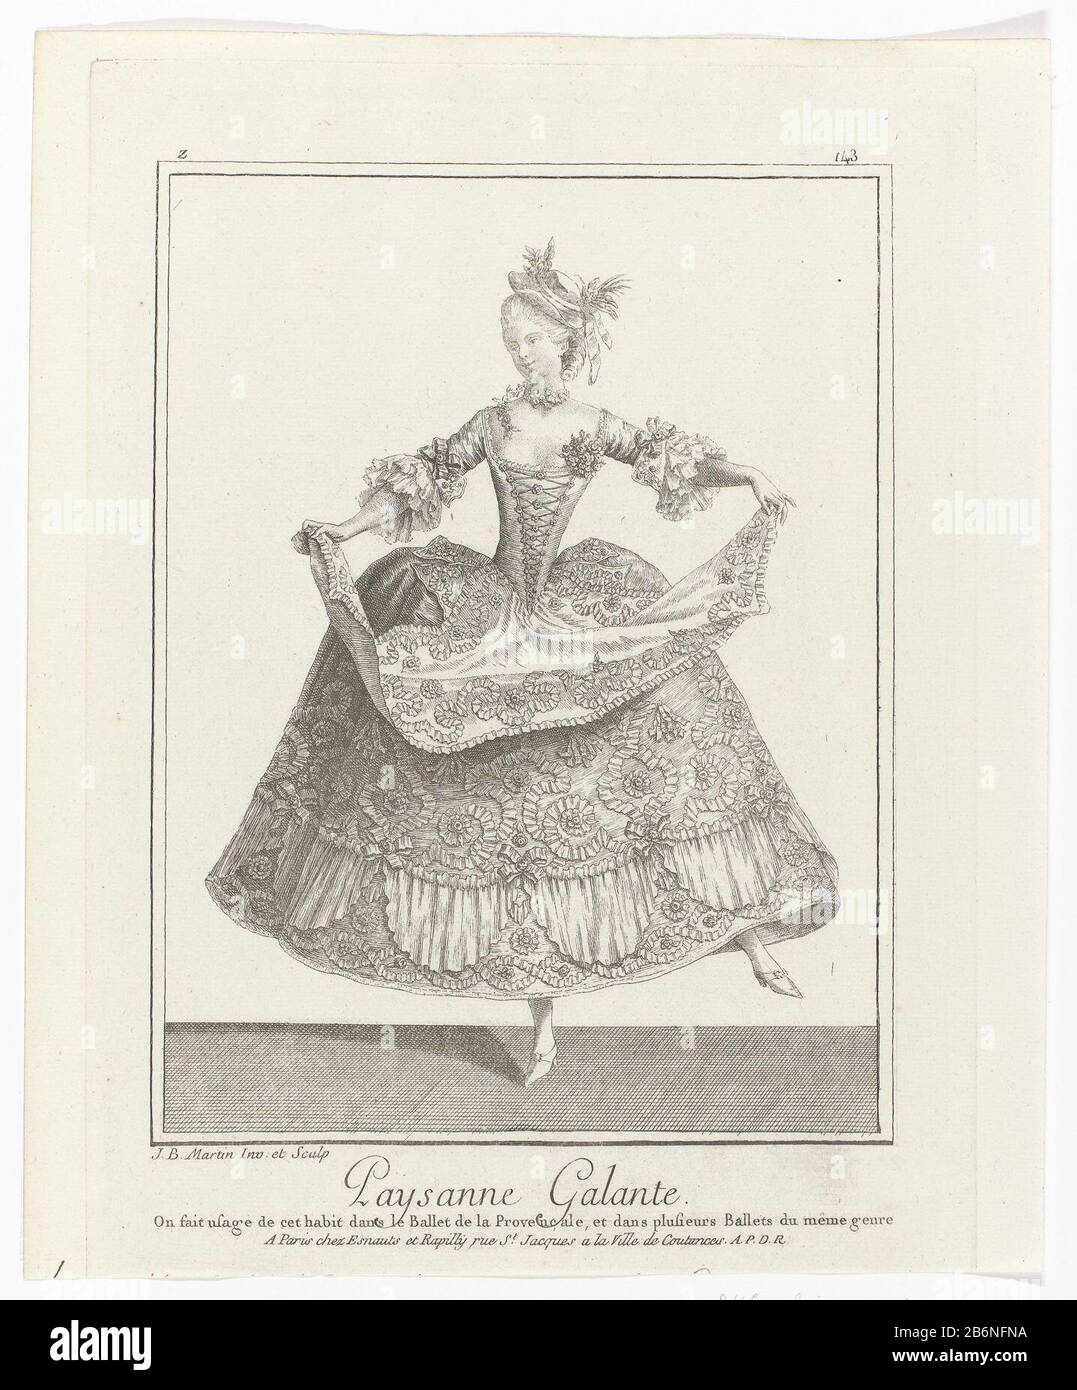 Dancer in ballet costume elegant farmer. She wears a dress with pointy  corset and square neckline, three quarter sleeves with bows and  engageantes. The skirt and decorative apron decorated with rosettes and